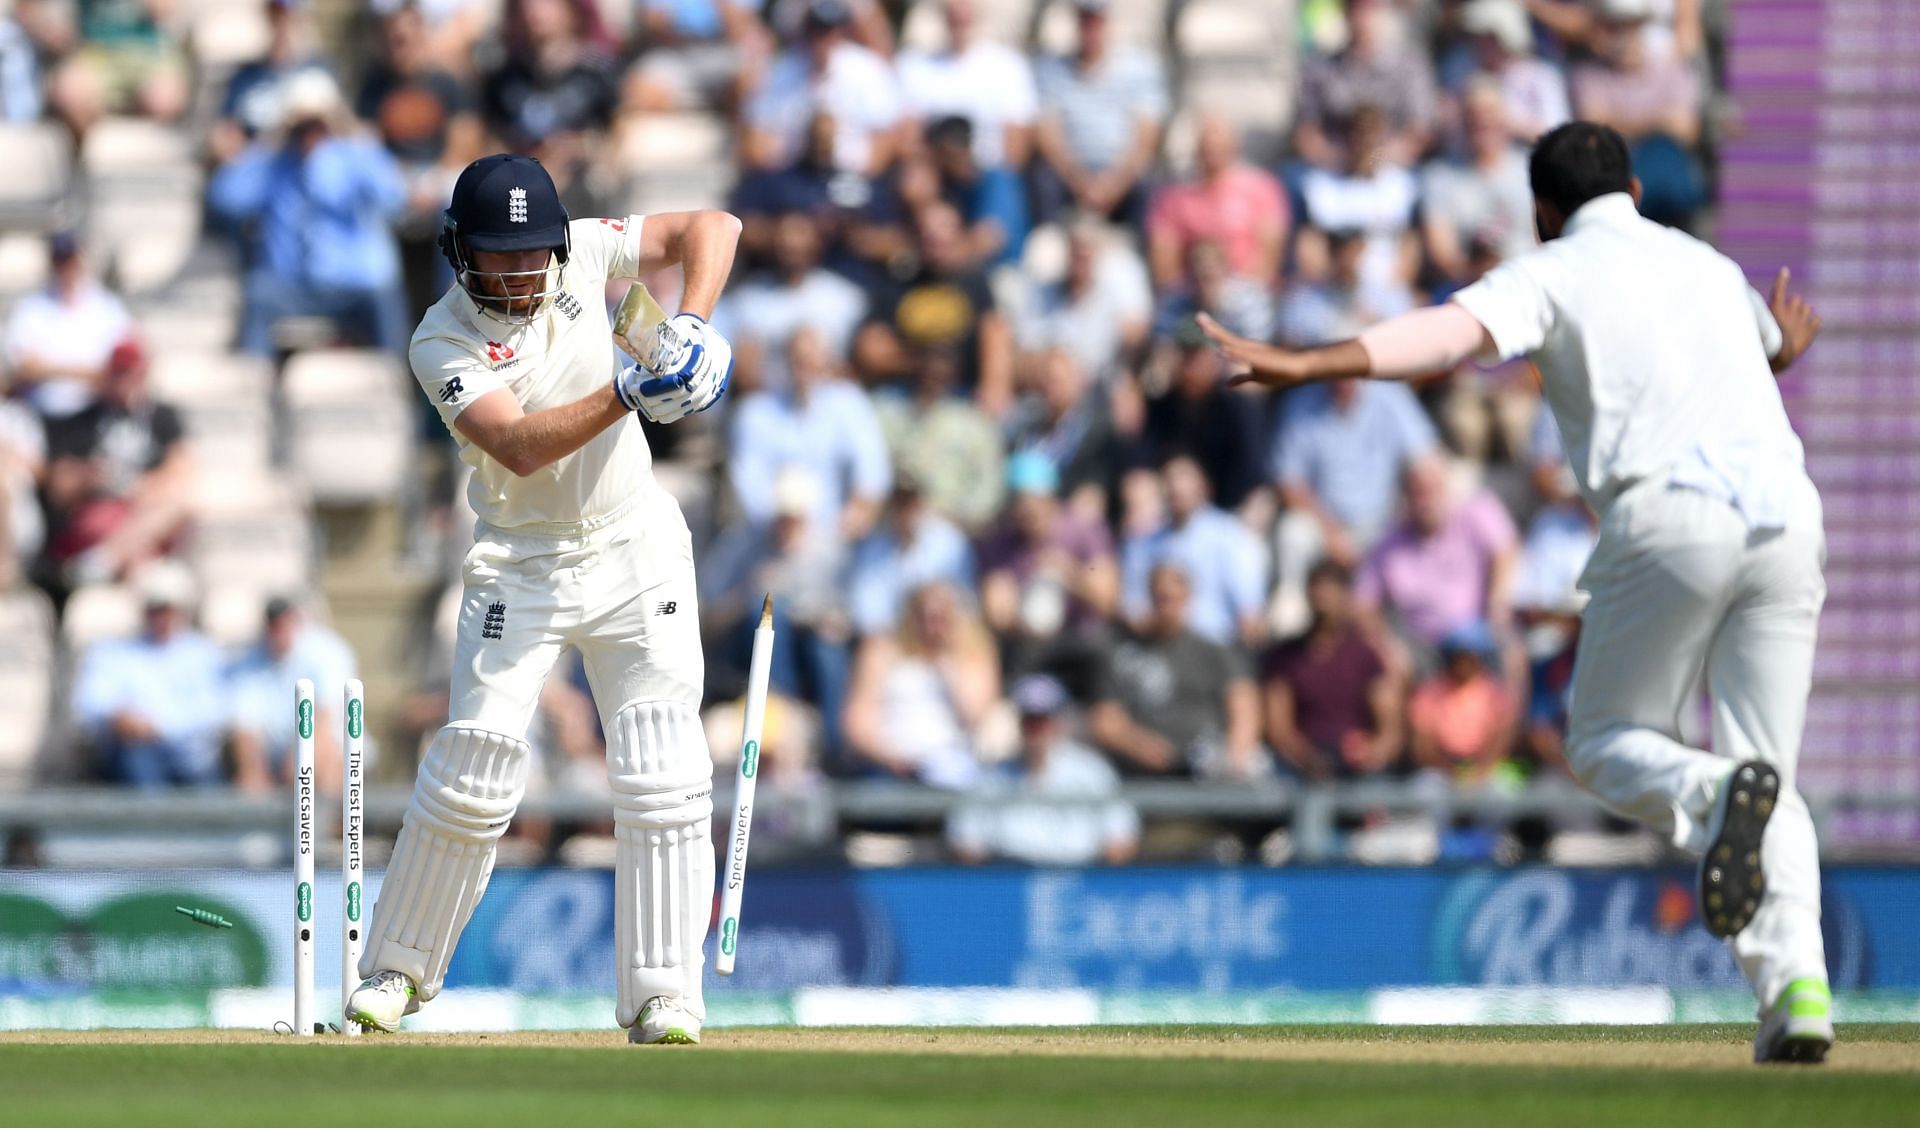 Jonny Bairstow is knocked over during the 2018 Southampton Test. (Pic: Getty Images)